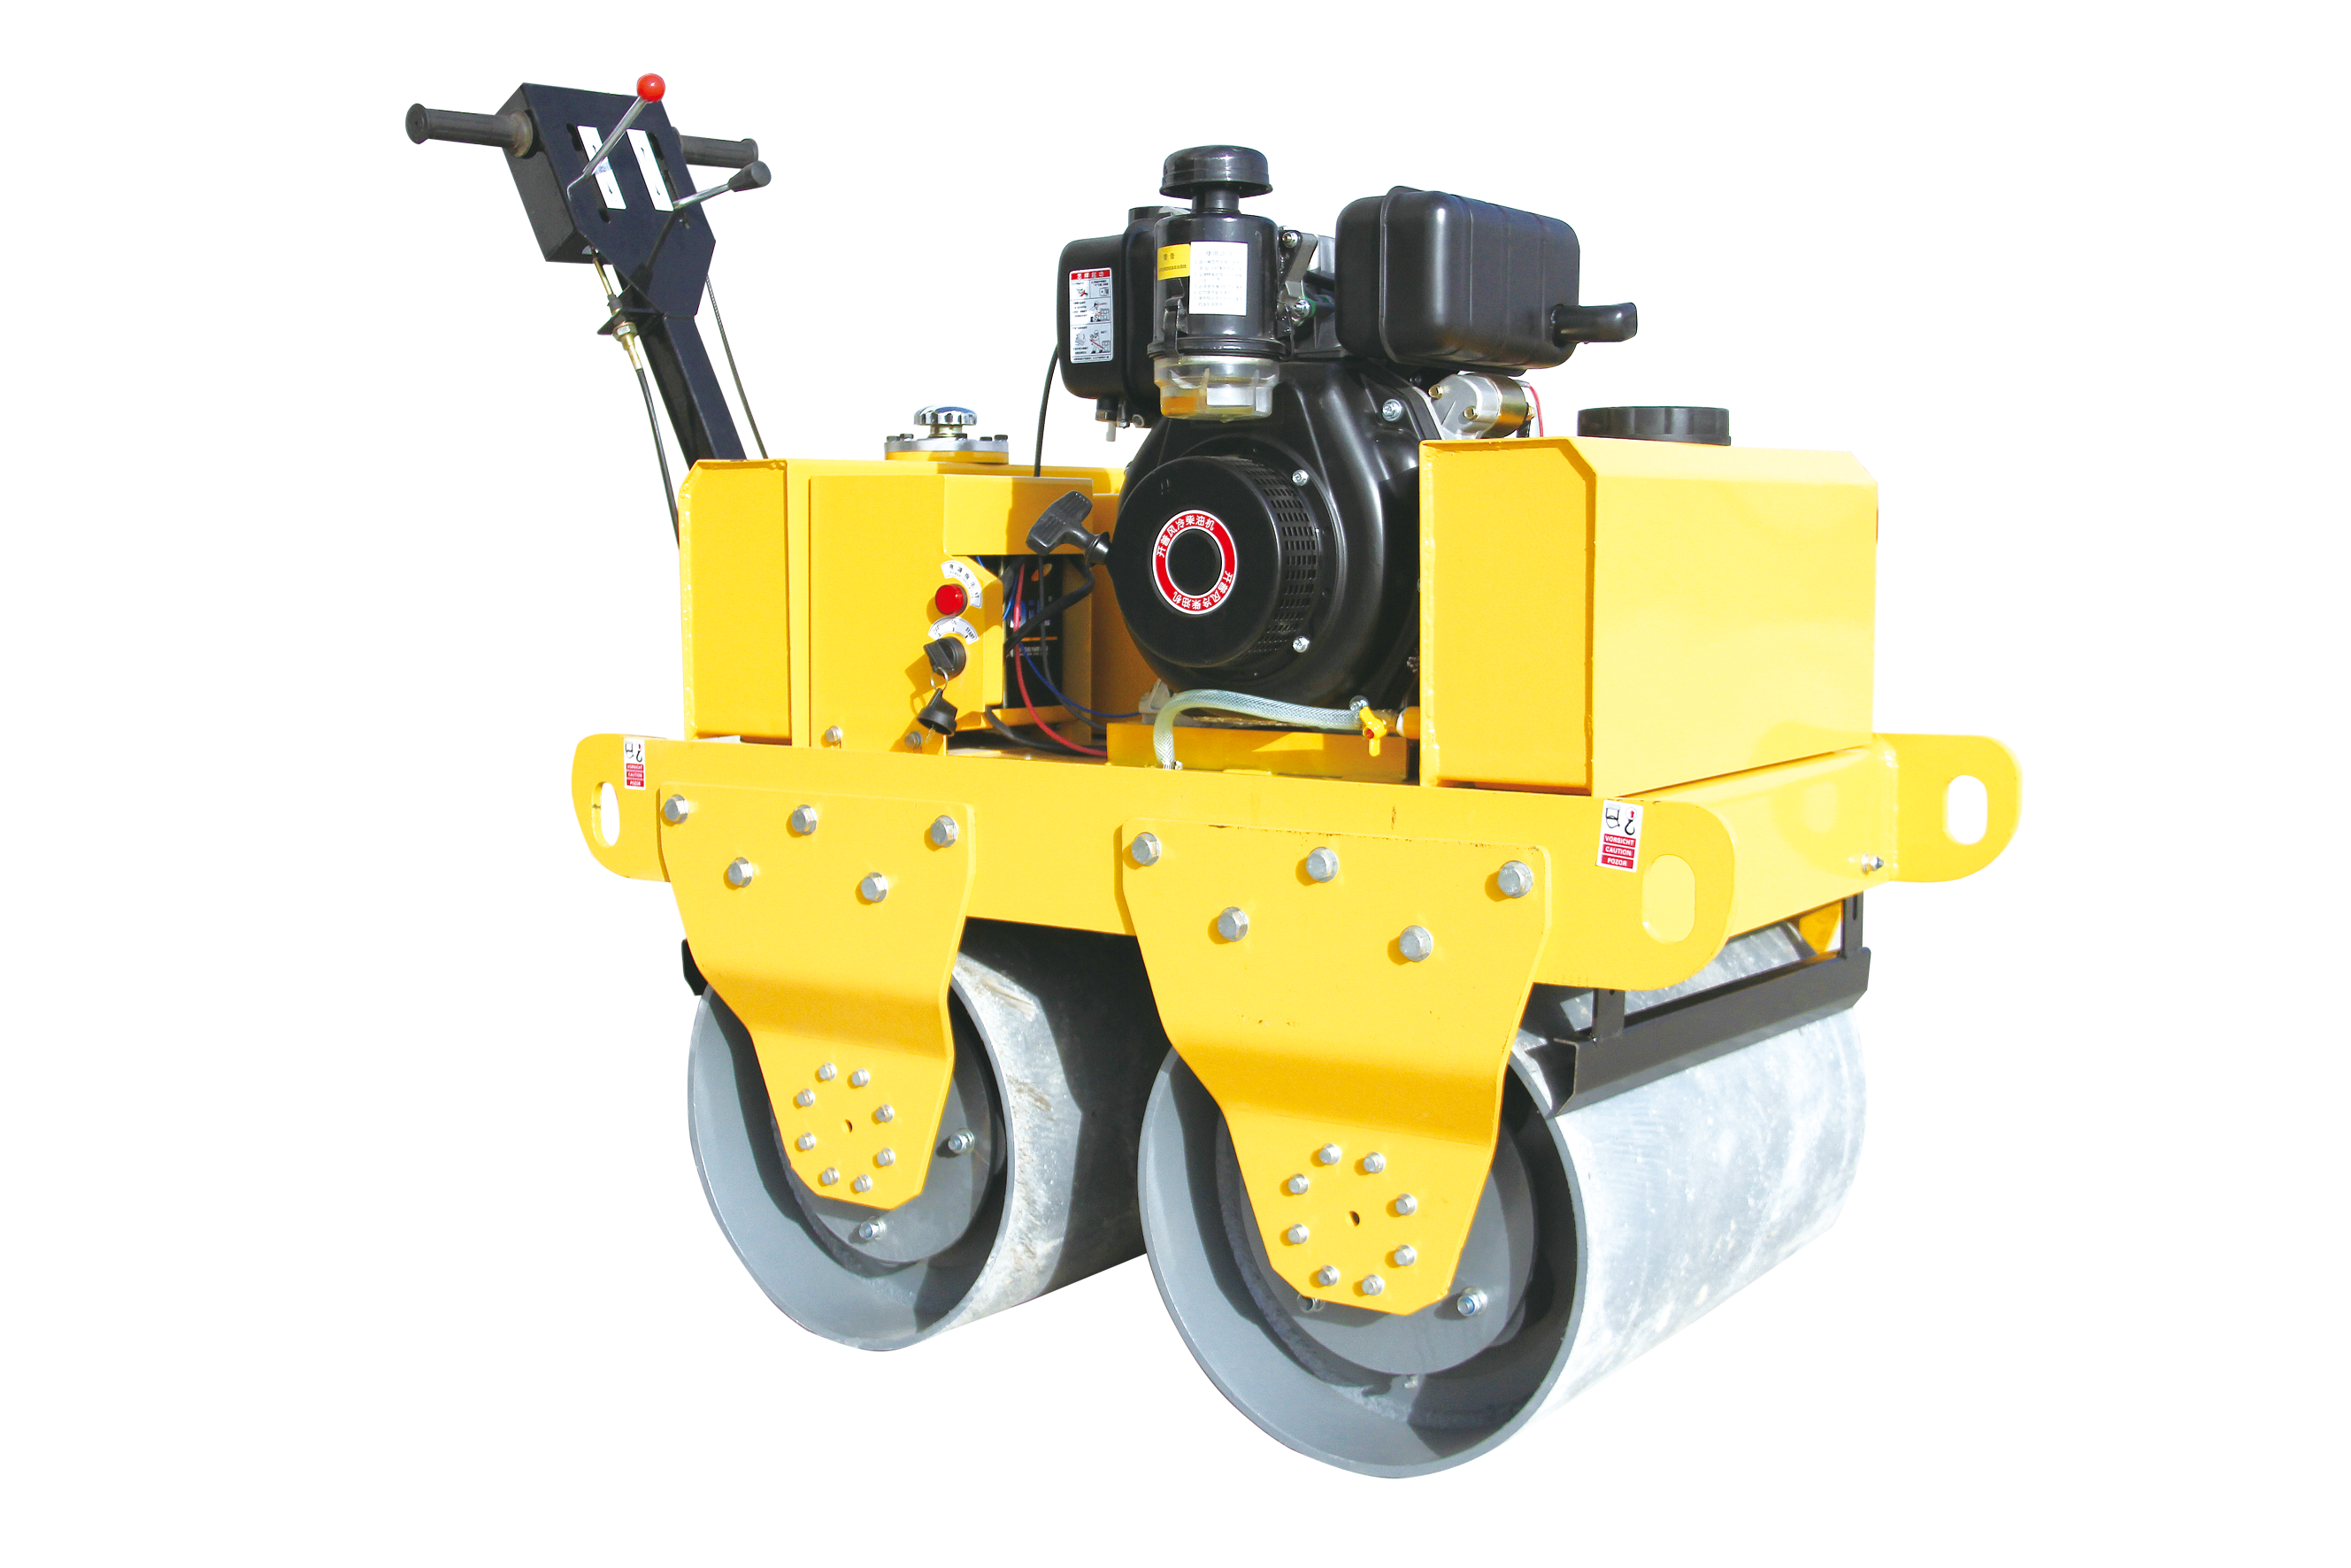 What do you need to know before using the small road roller for the first time?